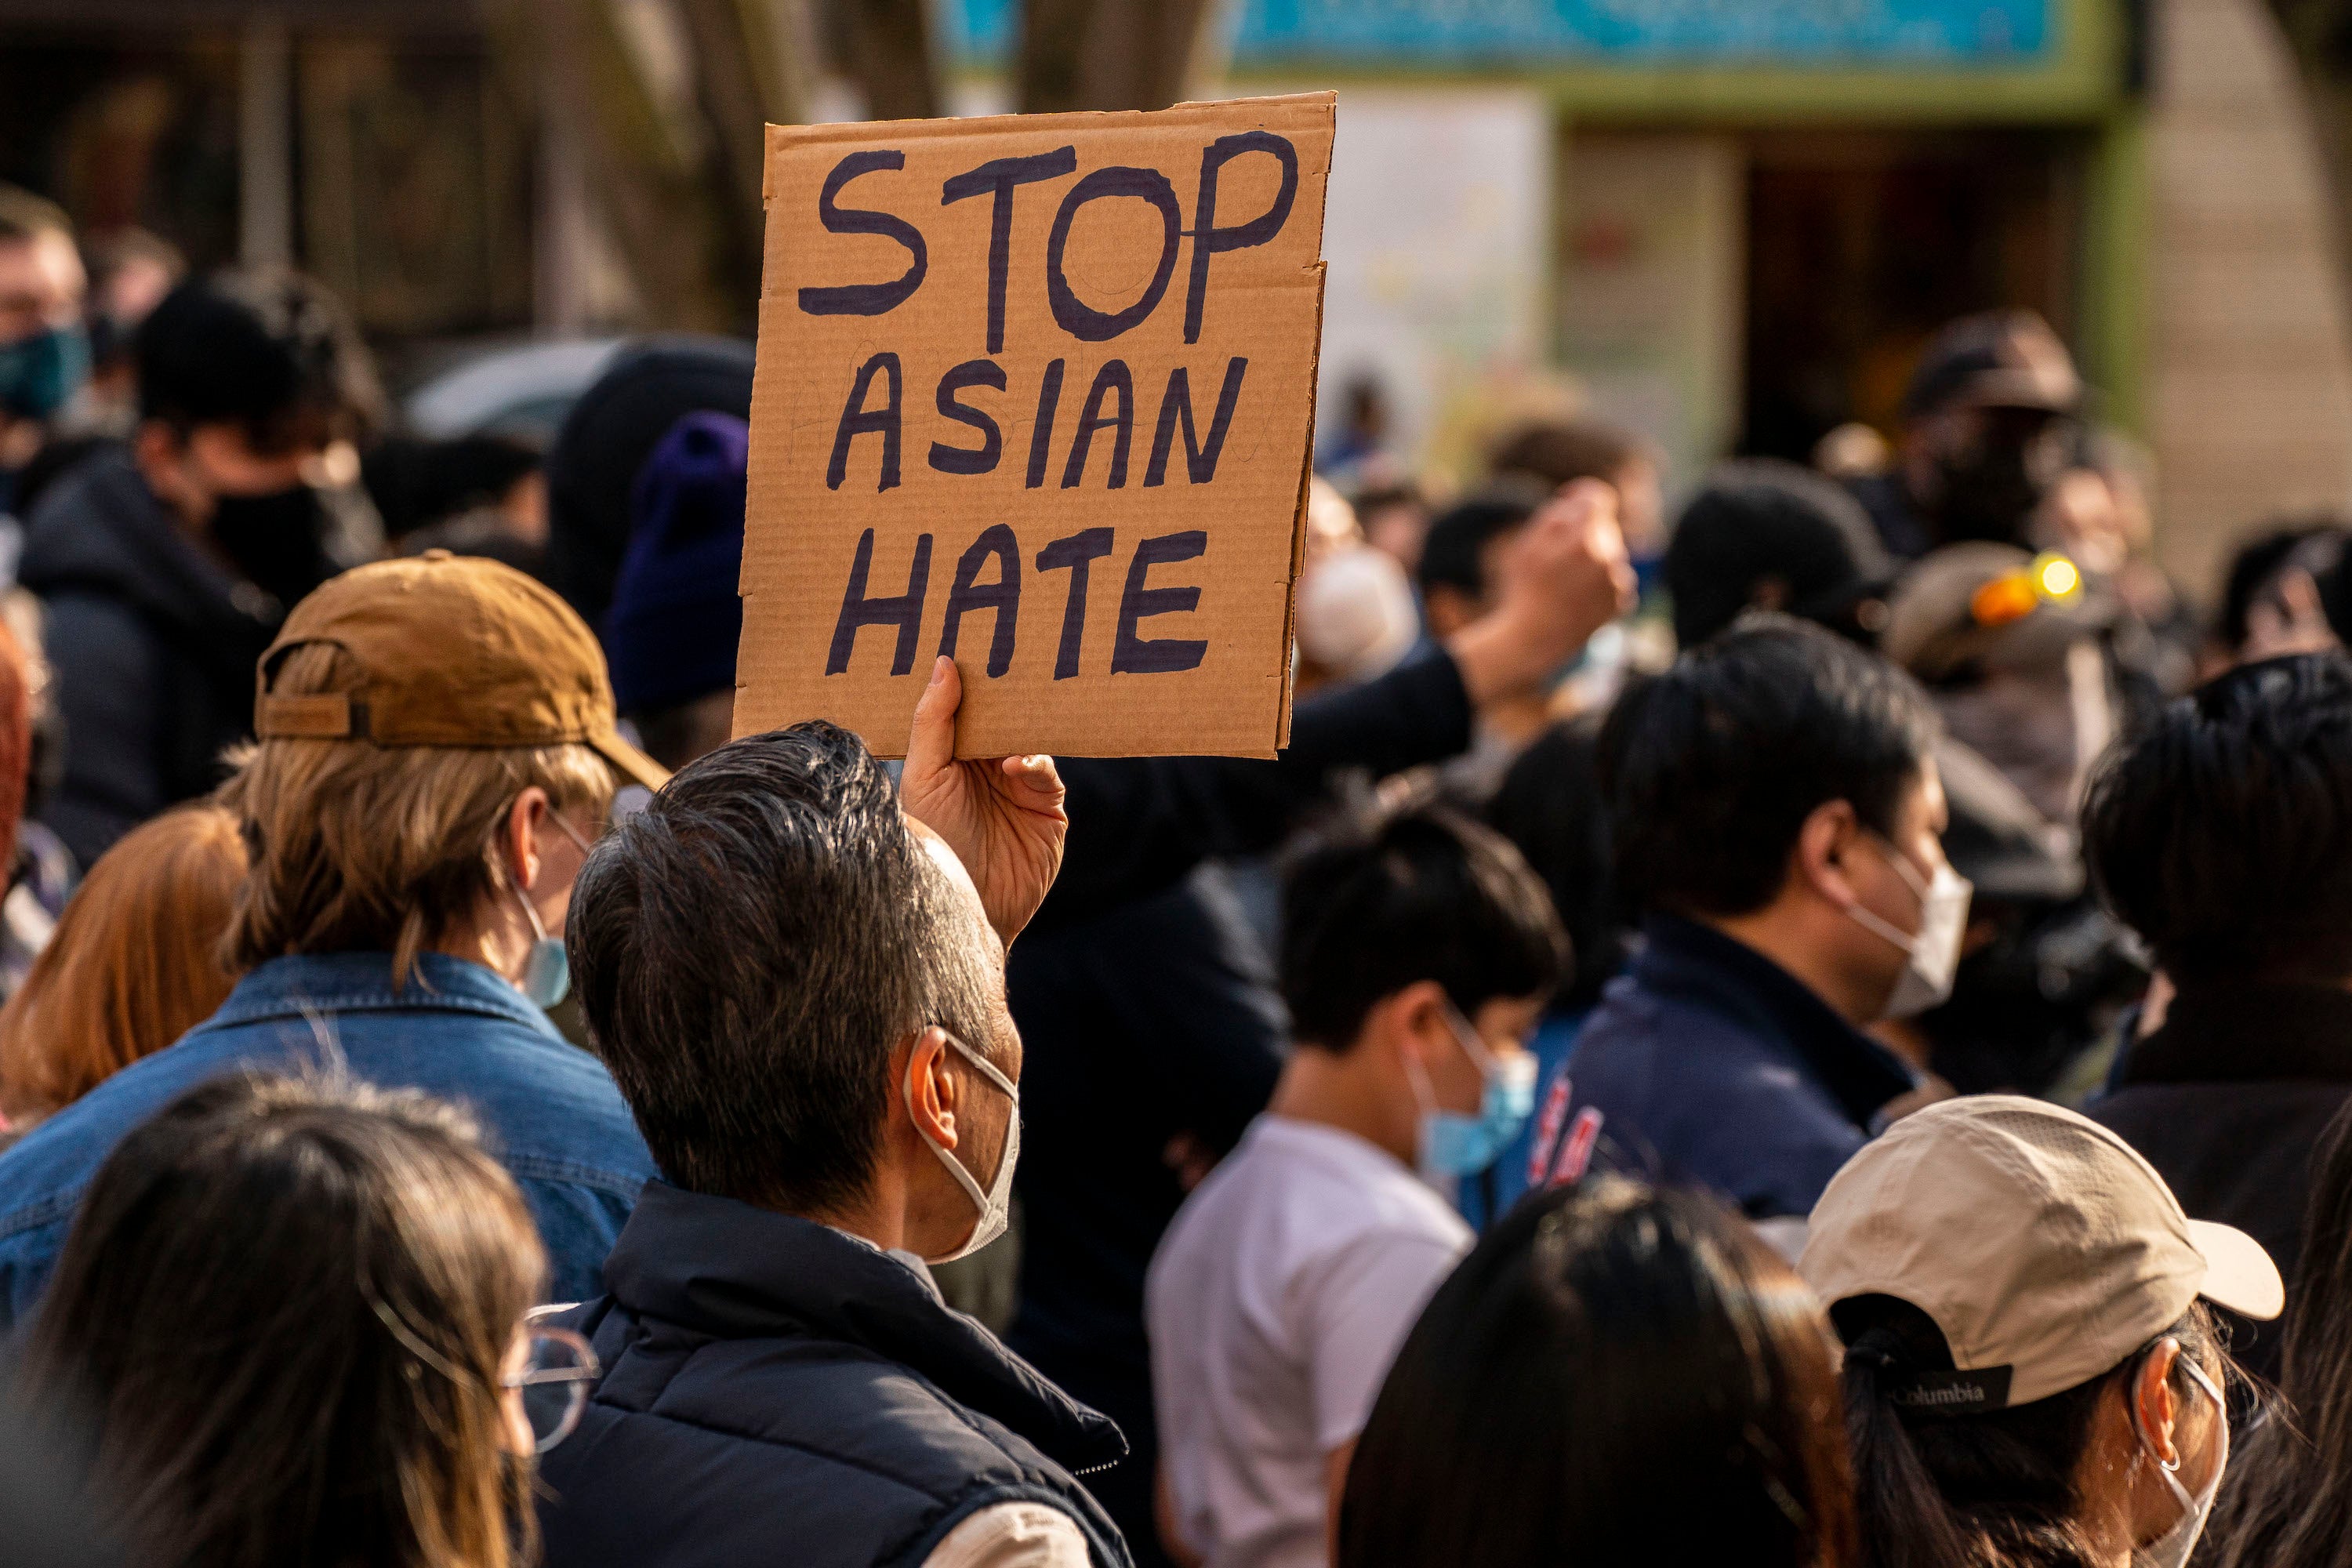 Demonstrators gather in the Chinatown-International District for a "We Are Not Silent" rally and march against anti-Asian hate and bias in Seattle, Washington.